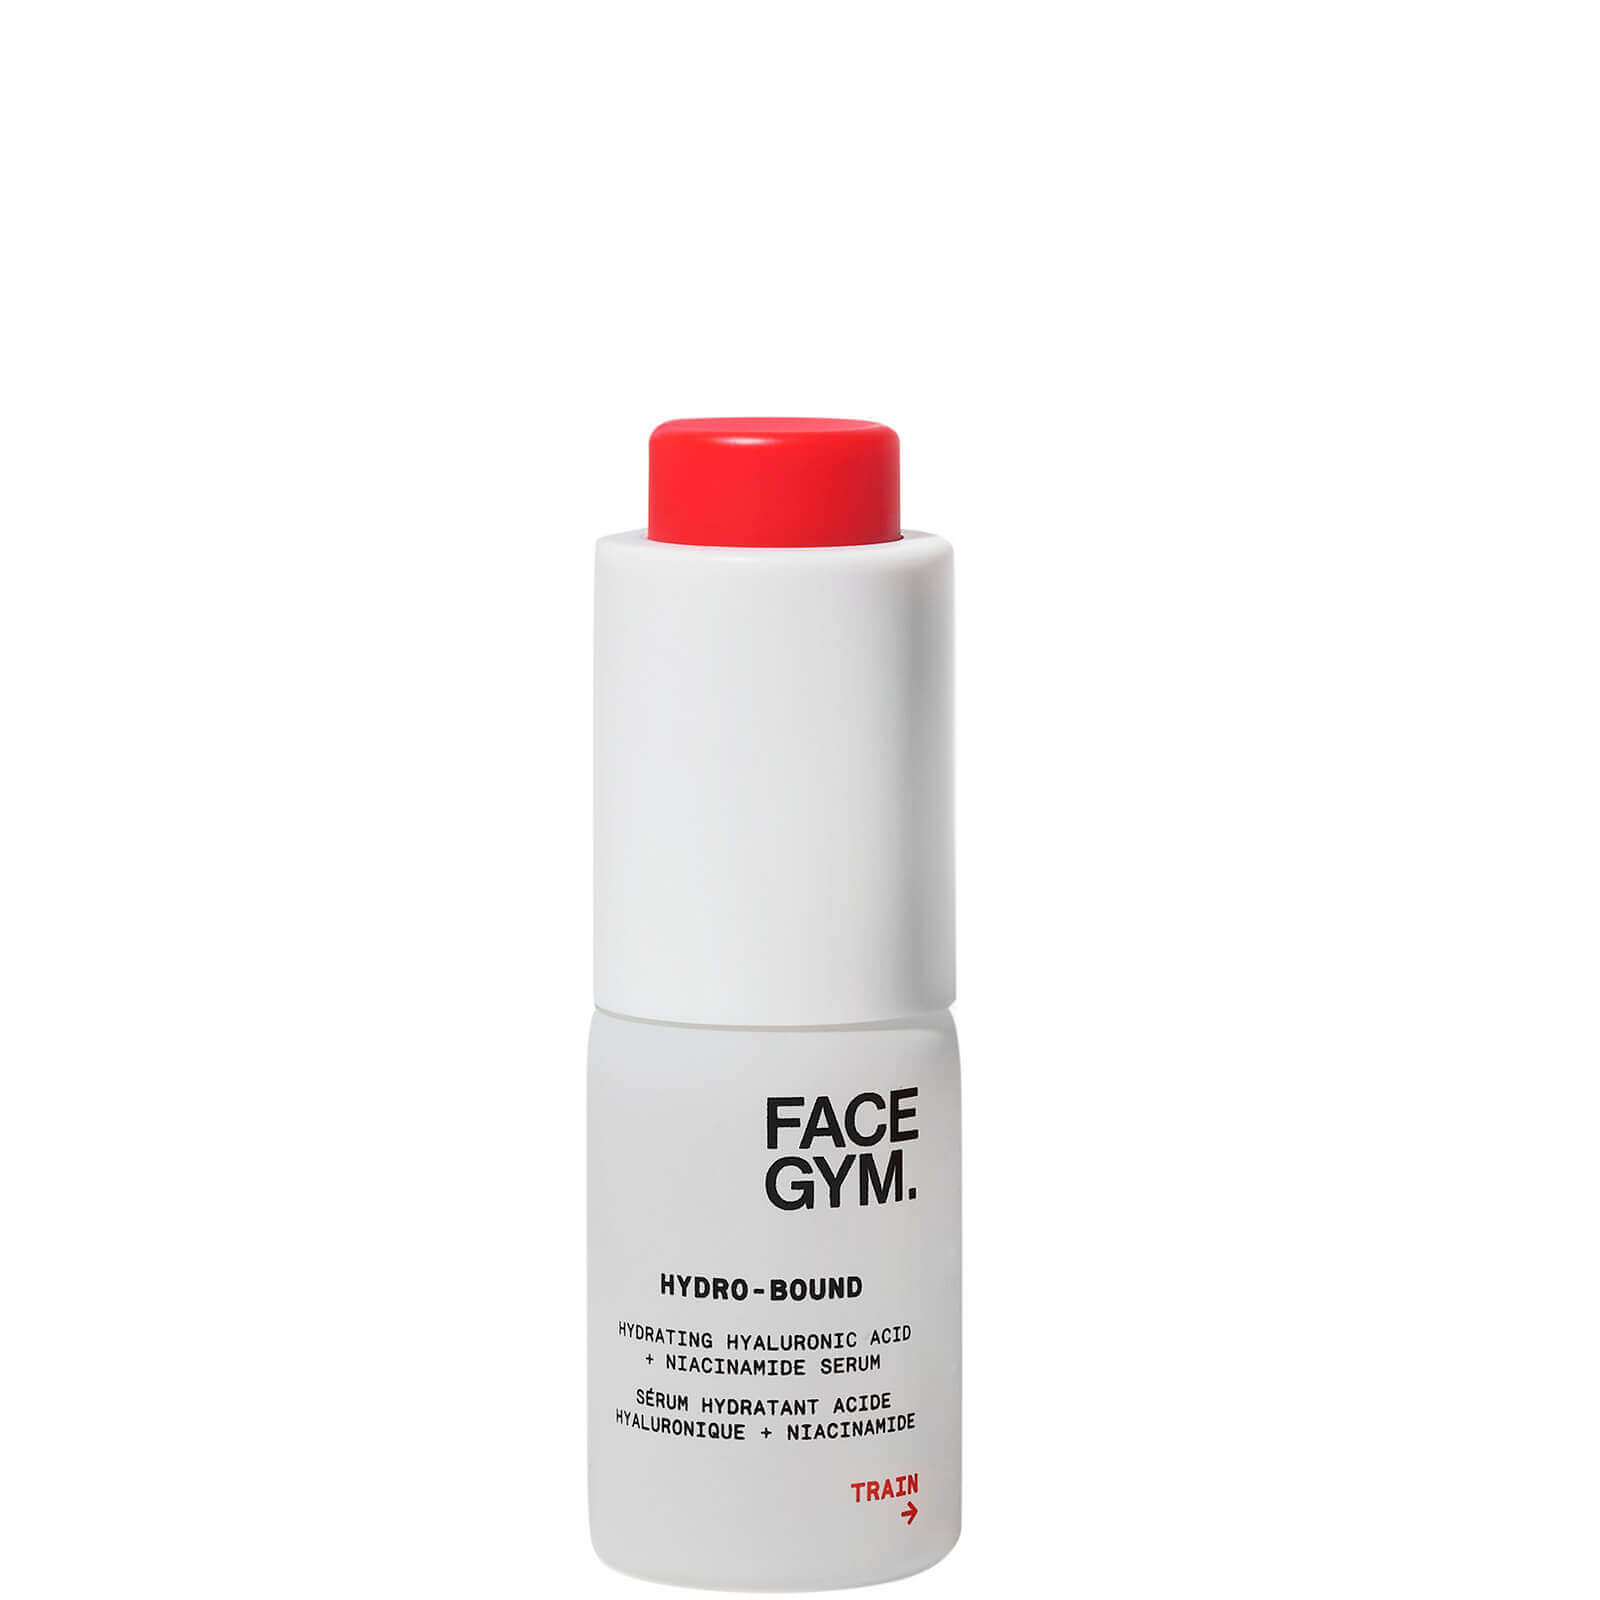 FaceGym Hydro-bound Hydrating Hyaluronic Acid and Niacinamide Serum (Various Sizes) - 15ml